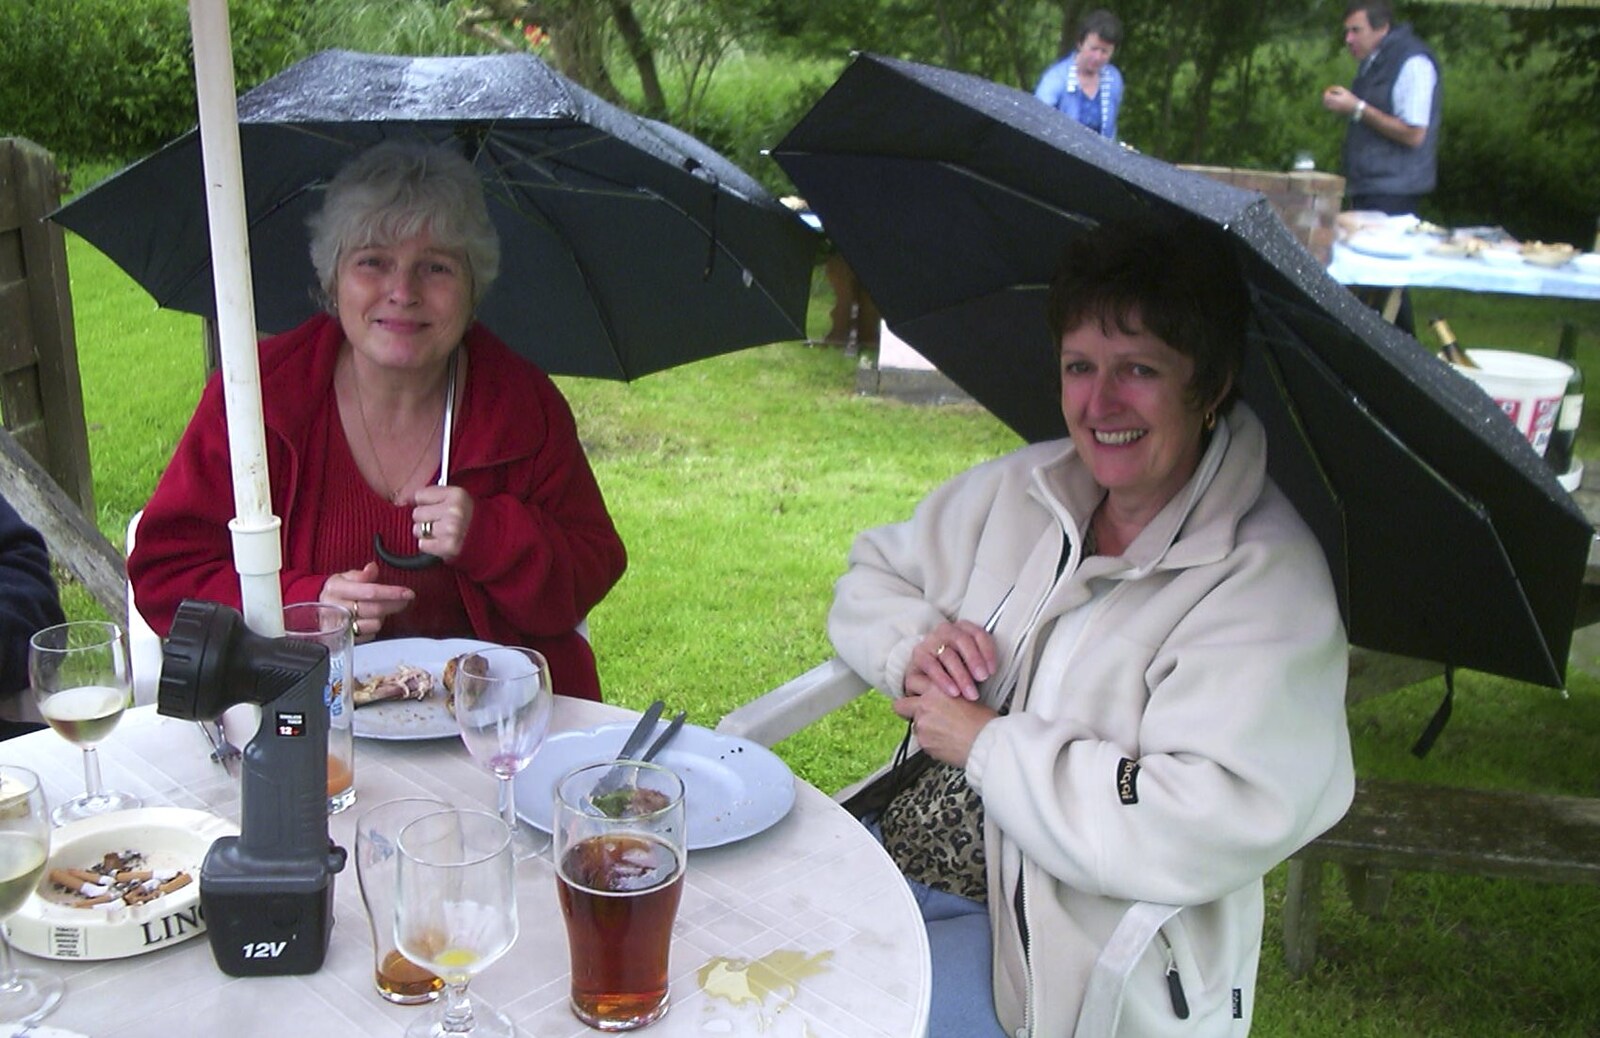 A Rainy Barbeque at the Swan Inn, Brome, Suffolk - 15th June 2002: Spam and Jill with umbrellas